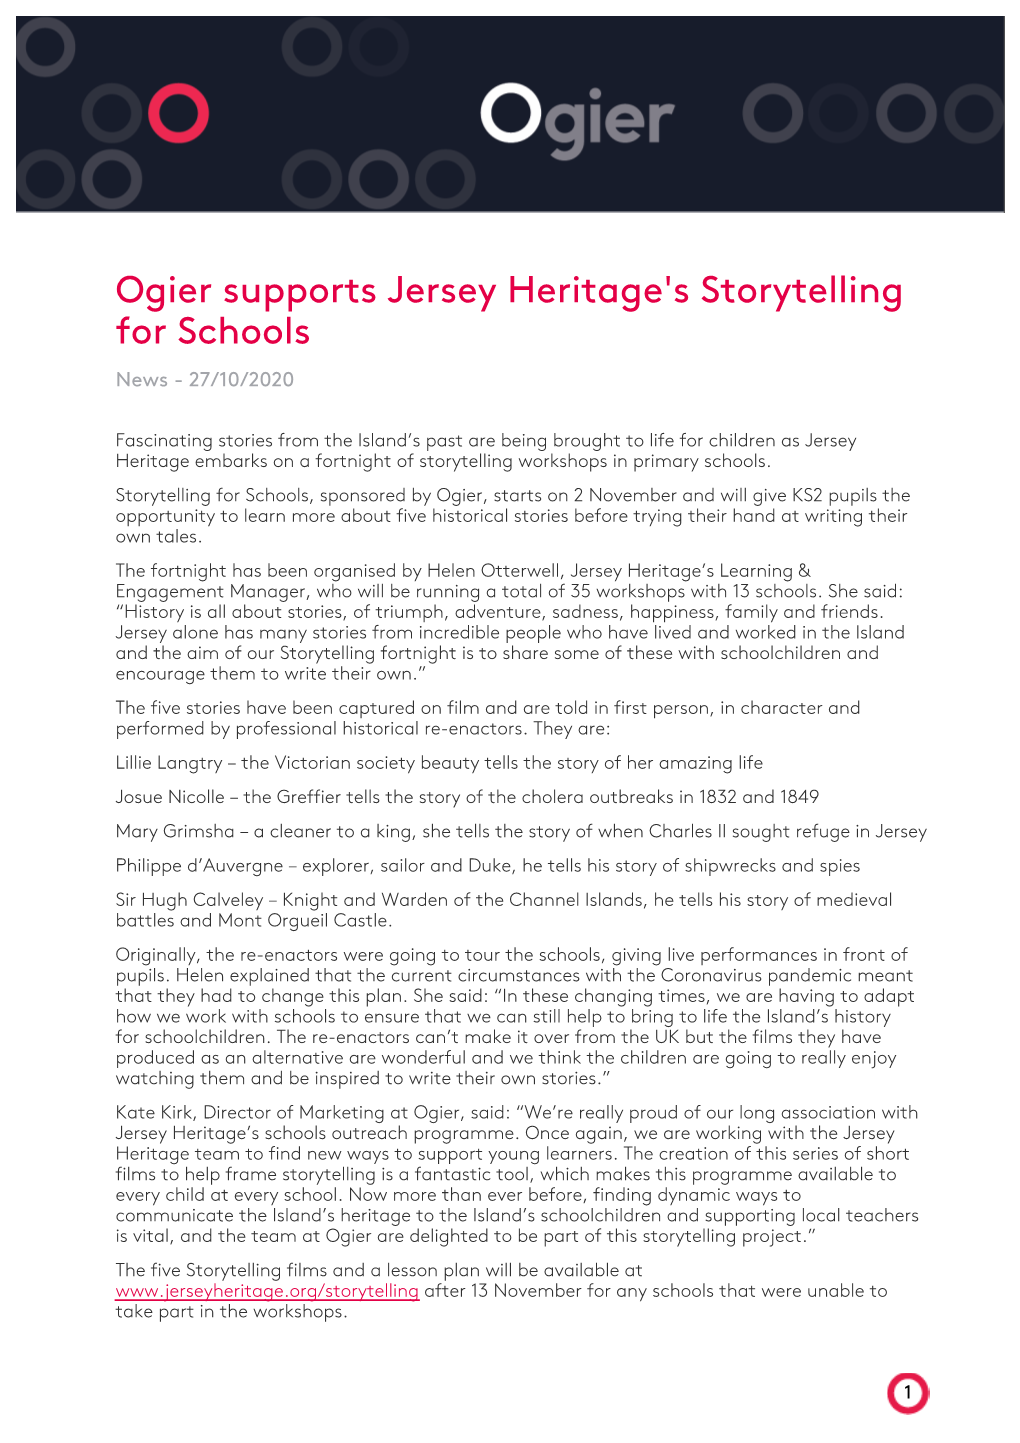 Ogier Supports Jersey Heritage's Storytelling for Schools News - 27/10/2020